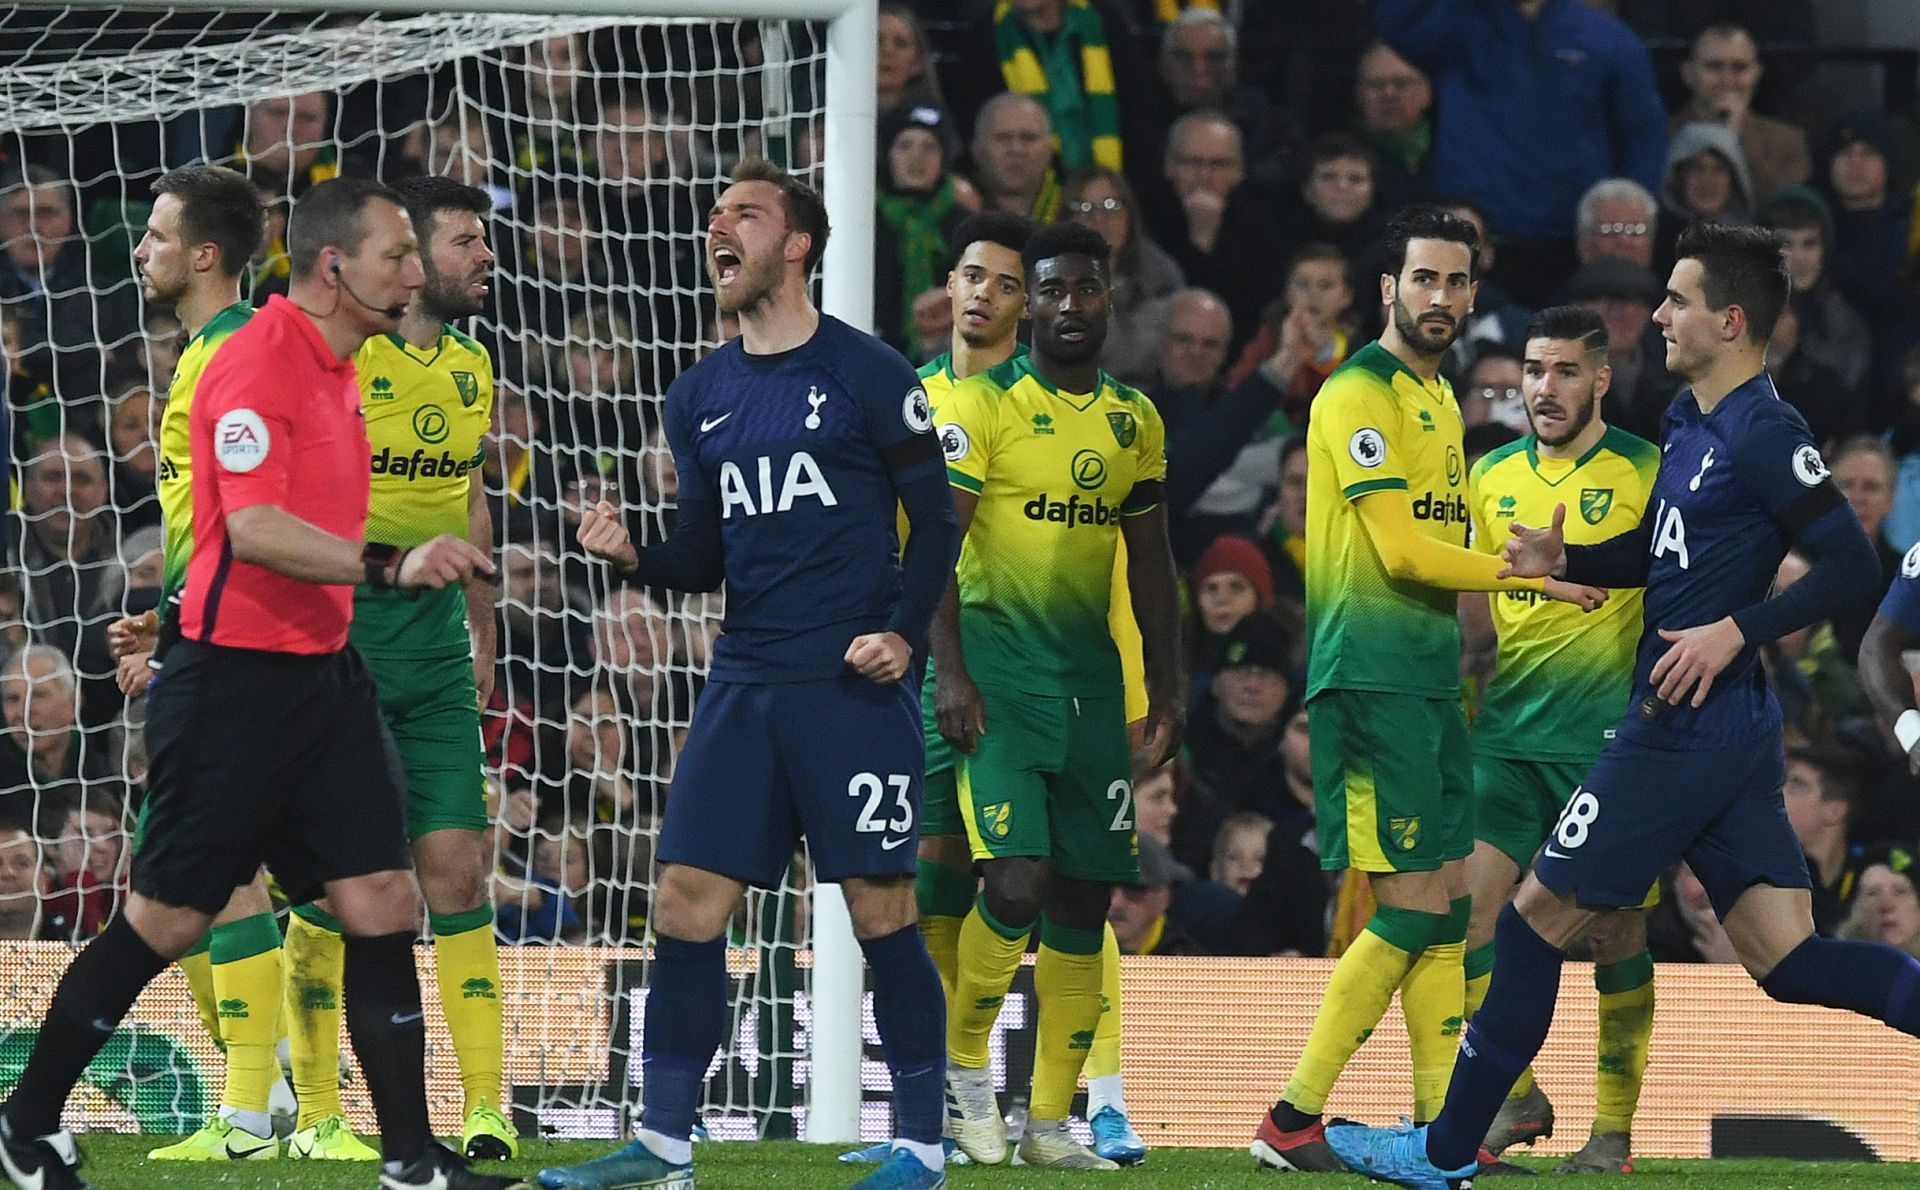 epa08093131 Tottenham's Christian Eriksen celebrates scoring their first goal  during the English Premier League match between Norwich City and Tottenham Hotspur at the Carrow Road Stadium, Norwich, Britain, 28 December 2019.  EPA/Alan Walter EDITORIAL USE ONLY. No use with unauthorized audio, video, data, fixture lists, club/league logos or 'live' services. Online in-match use limited to 120 images, no video emulation. No use in betting, games or single club/league/player publications